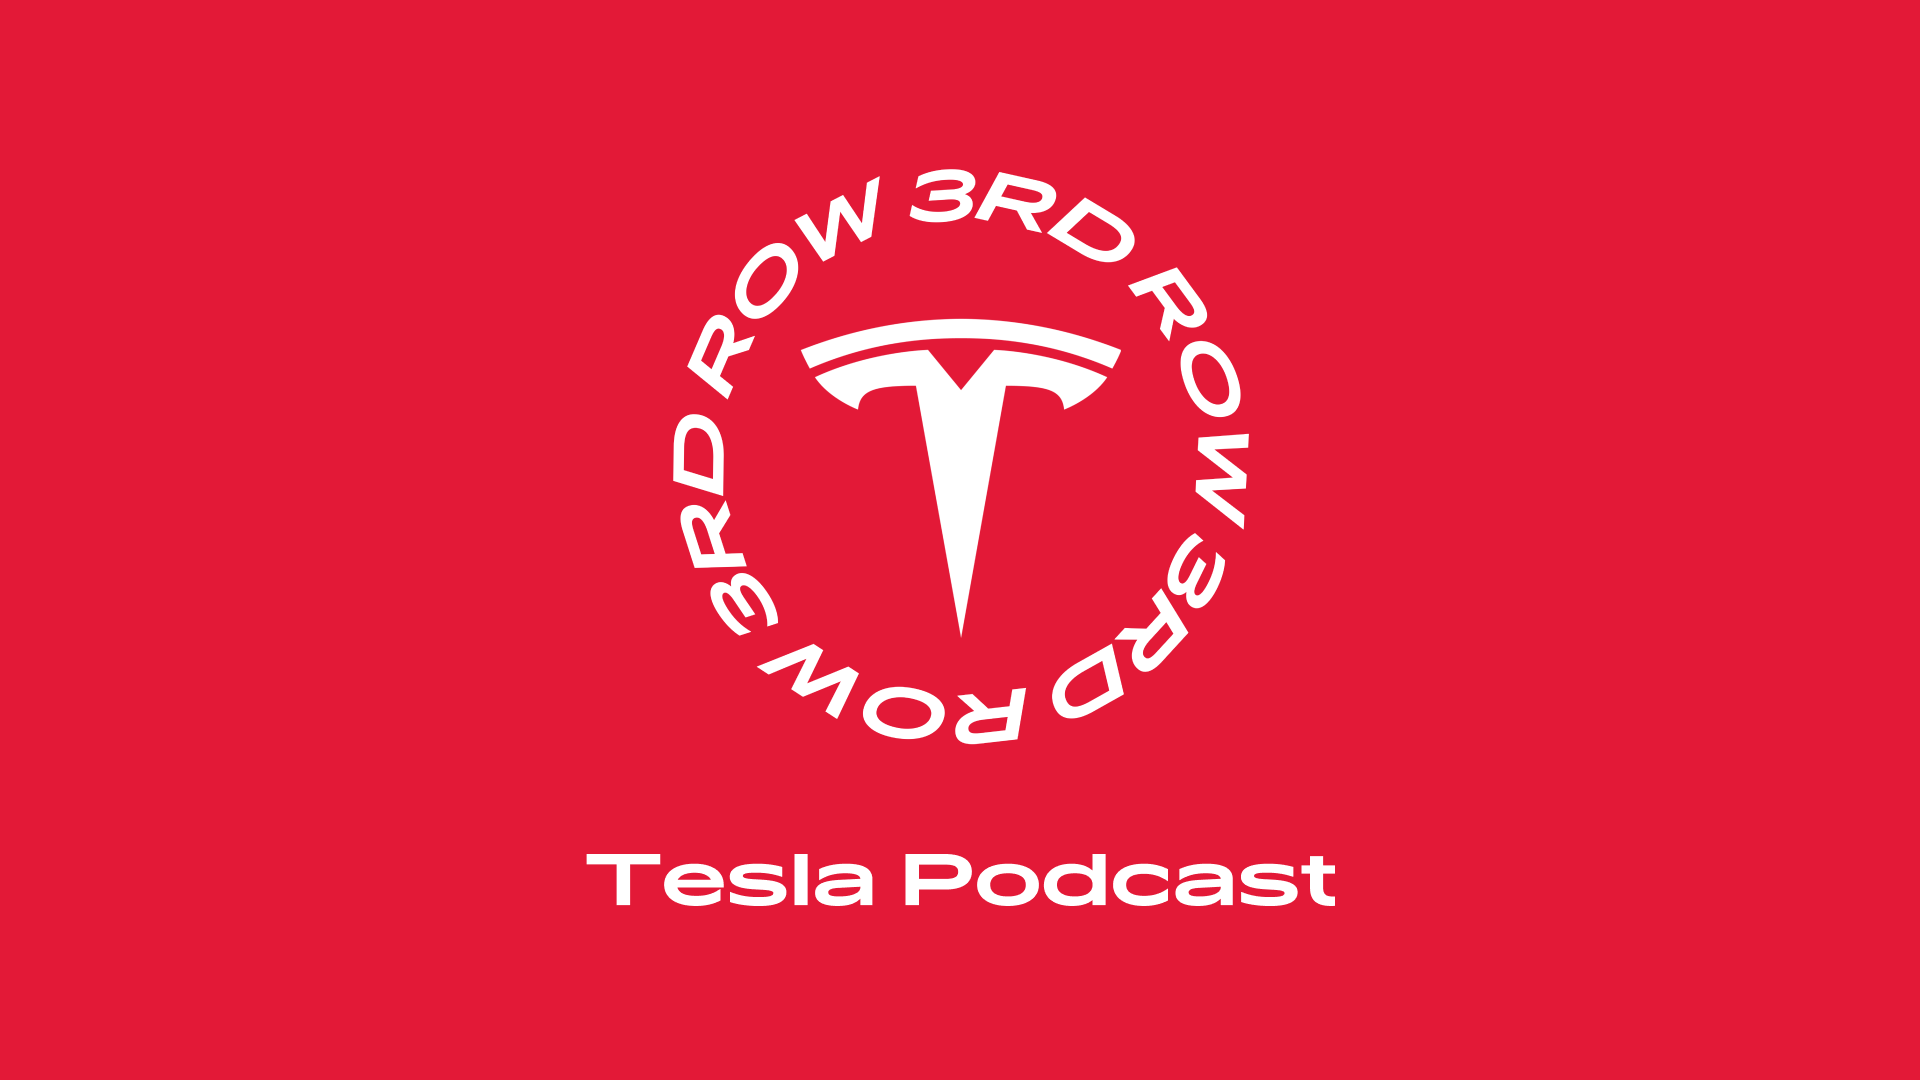 This week's episode of Third Row Tesla: A deep dive into what makes Tesla so unique, and what inspires its community